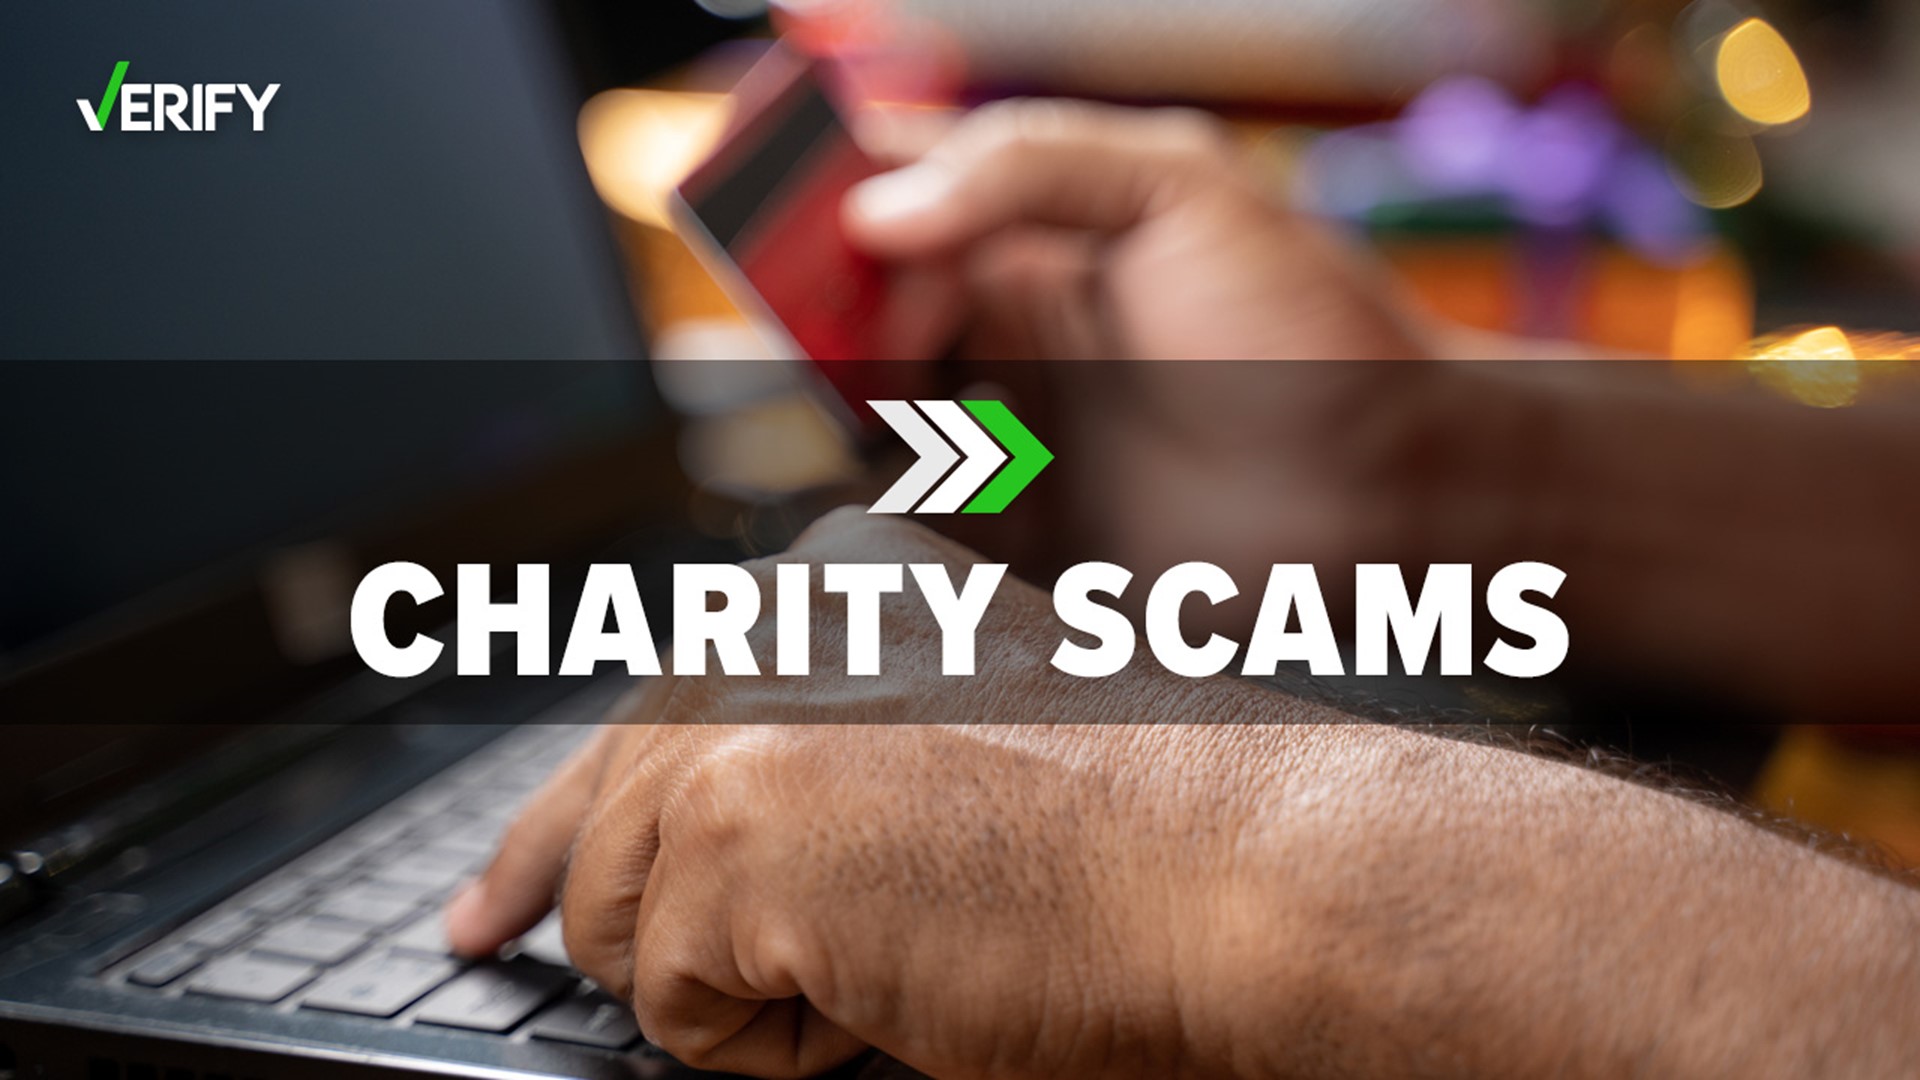 In the wake of the mass shooting in Buffalo, New York, officials warned of the potential for scams. Here are ways to make sure your donation is in the right hands.